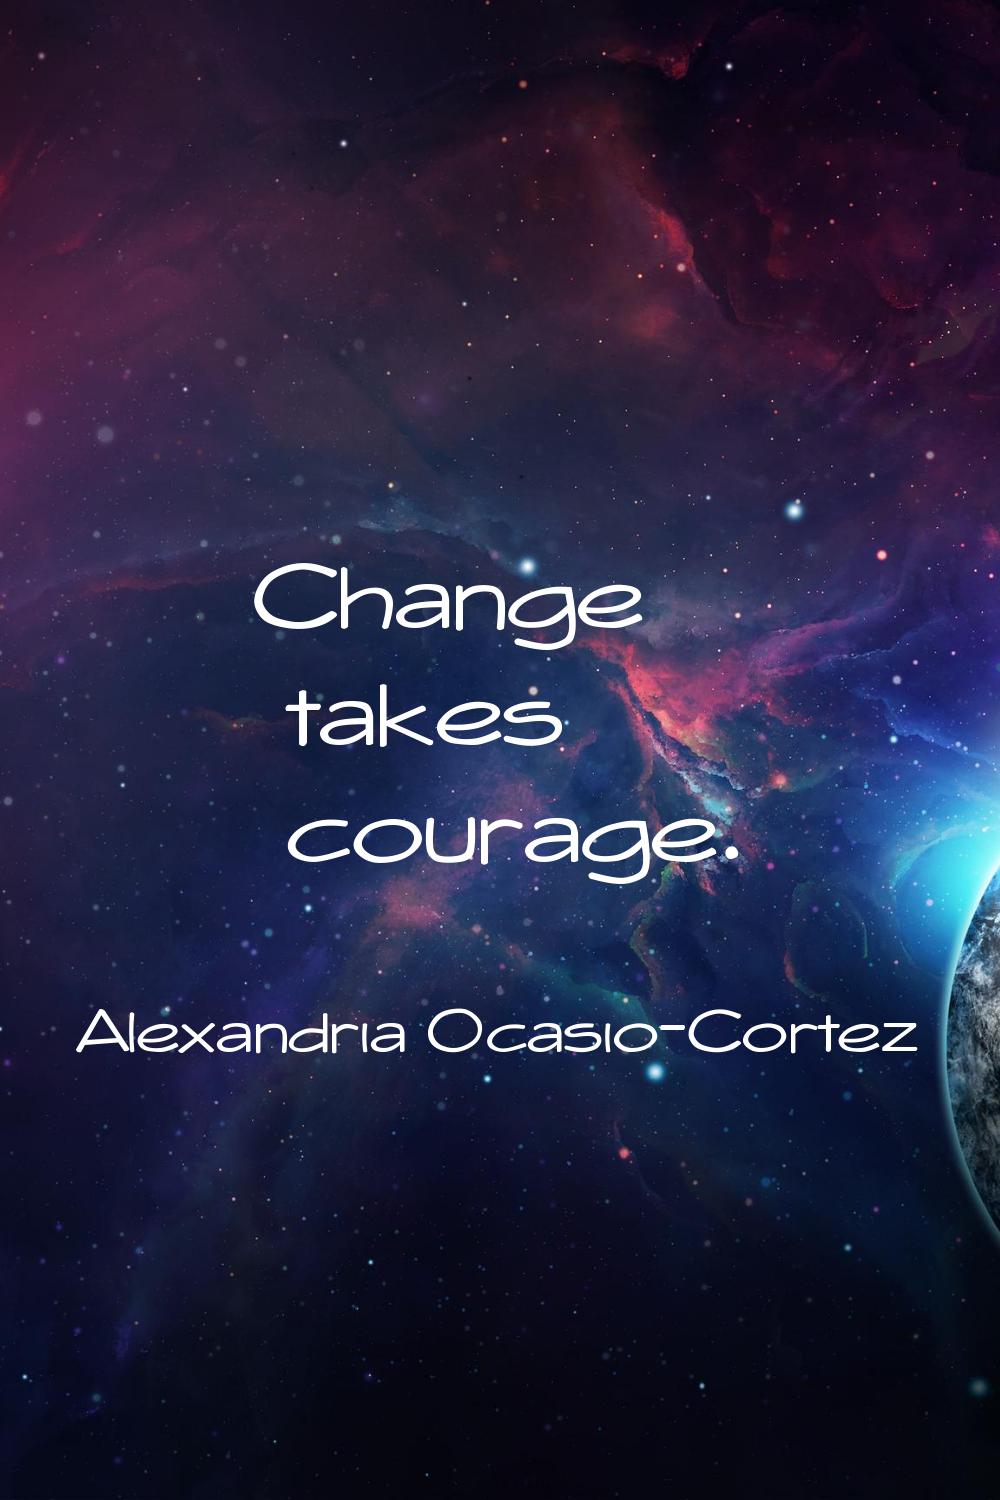 Change takes courage.